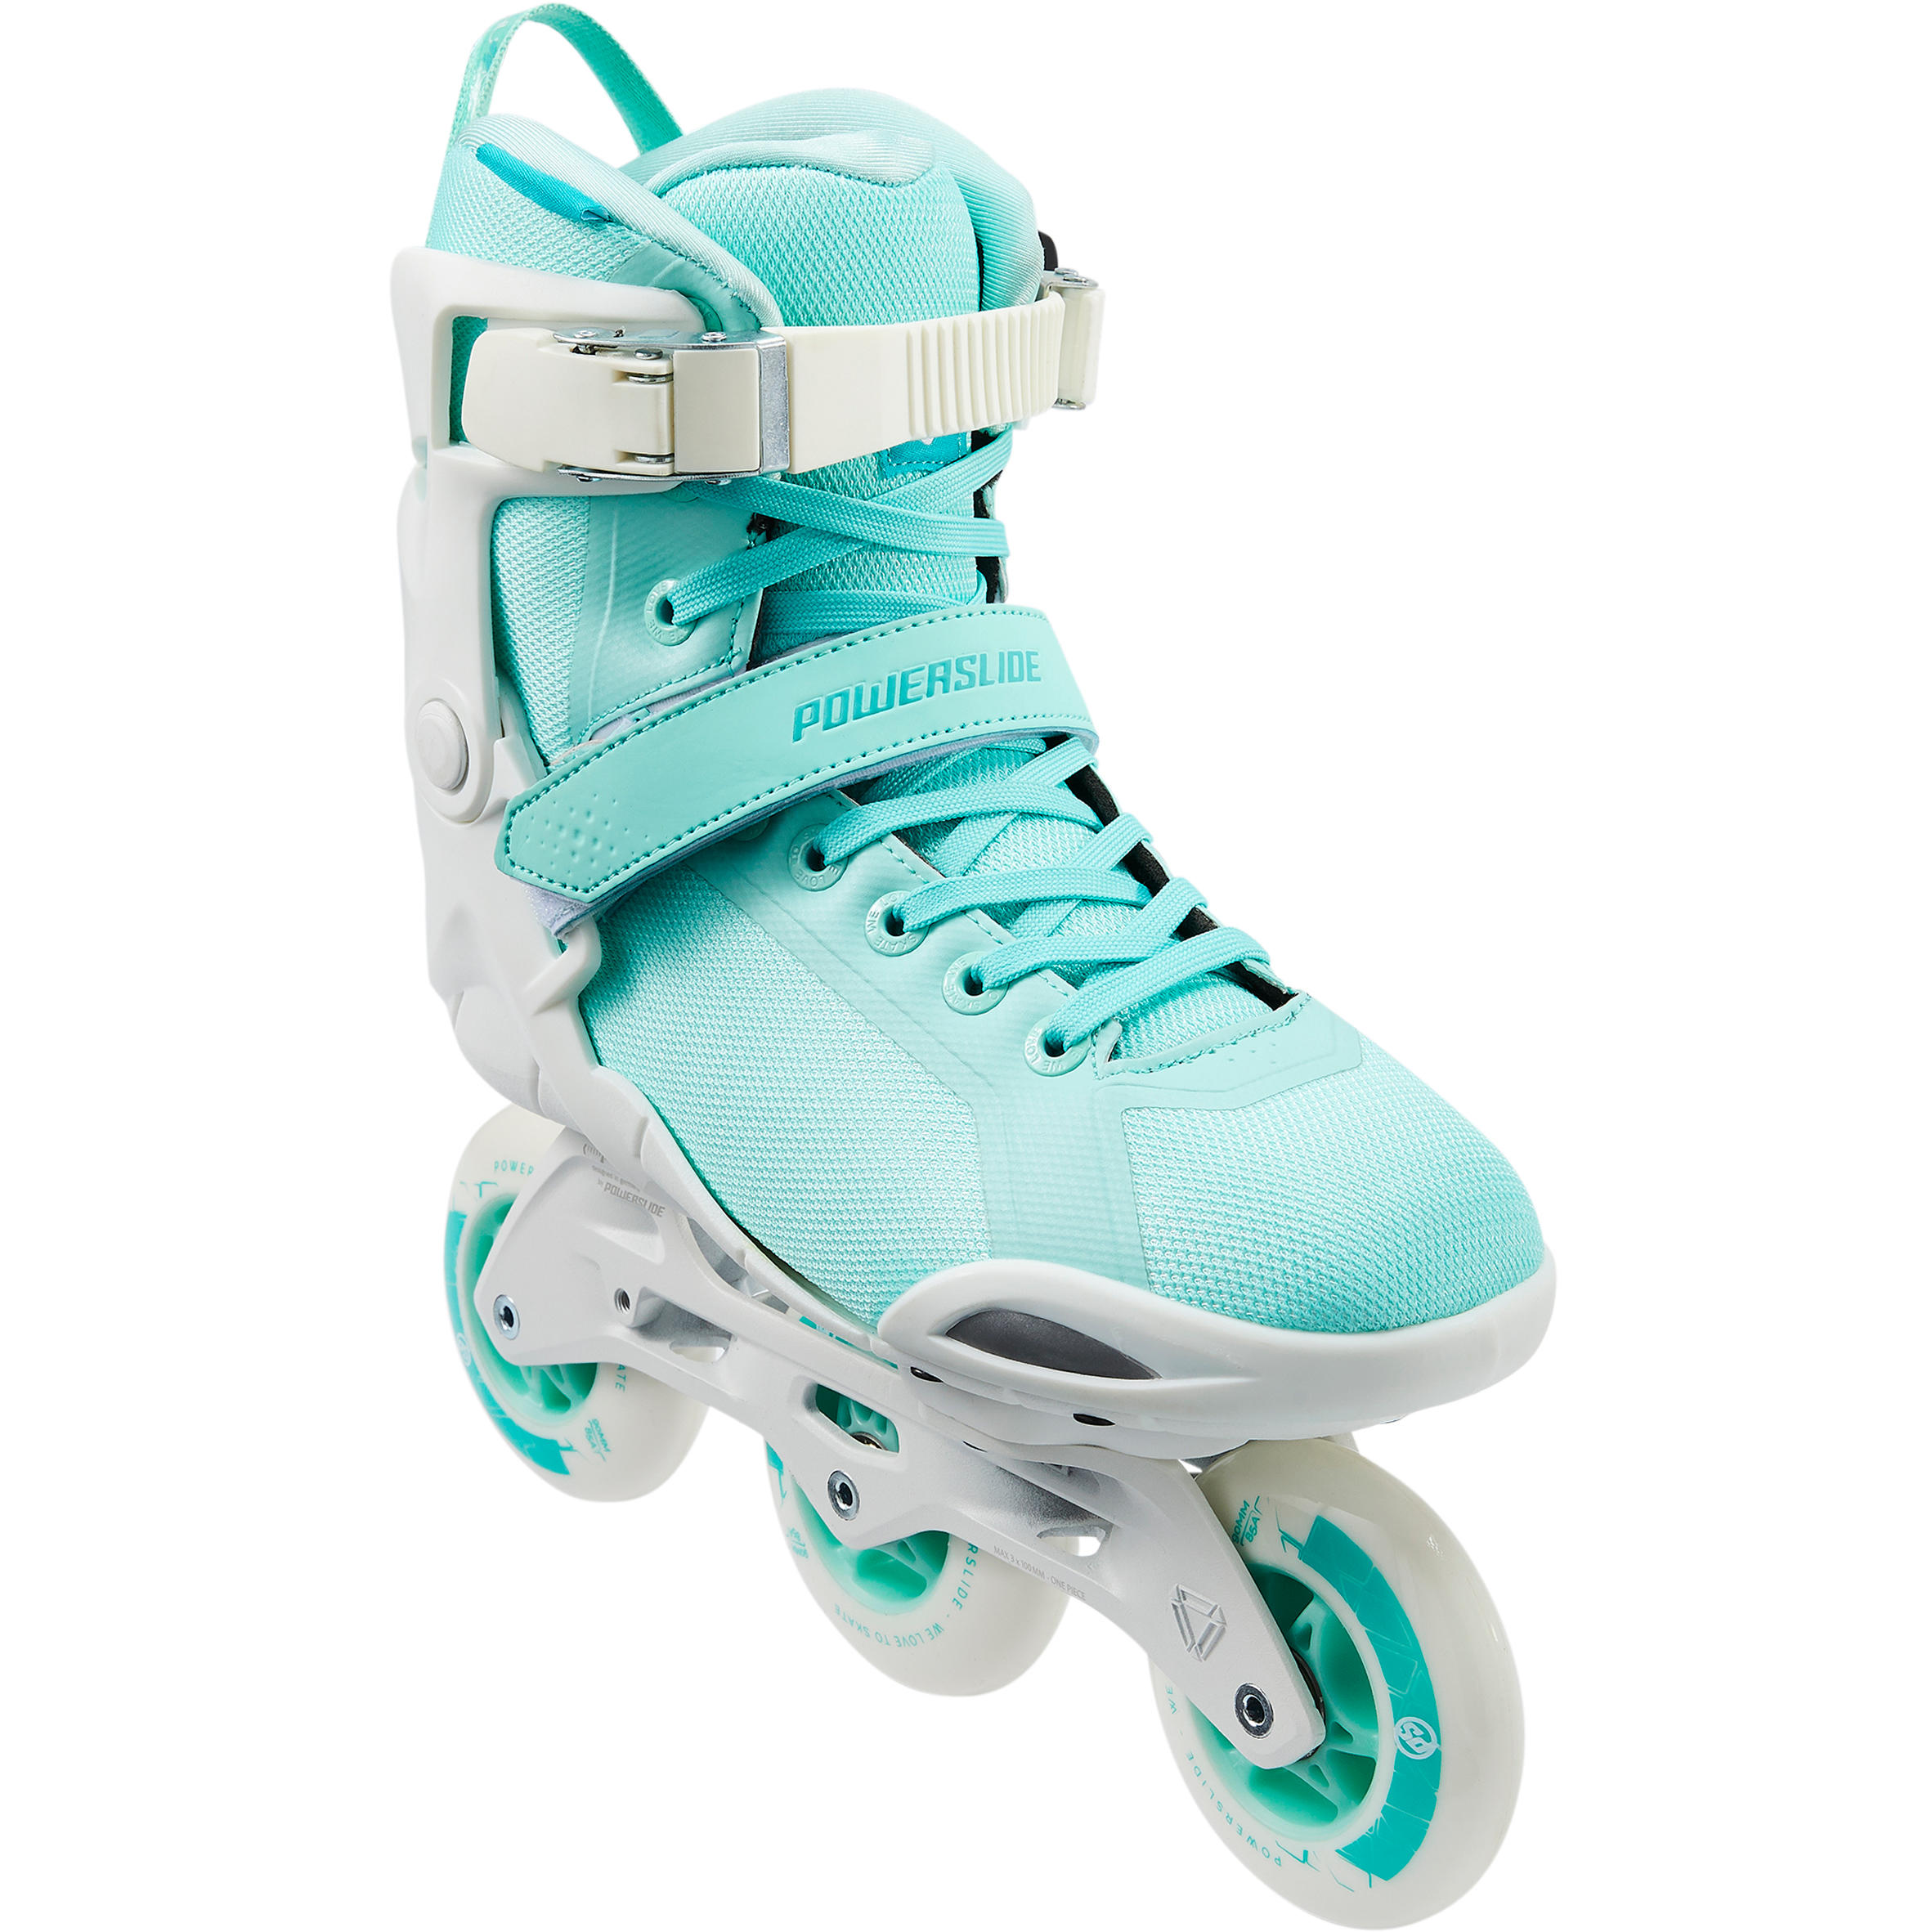 skating shoes for 14 year old